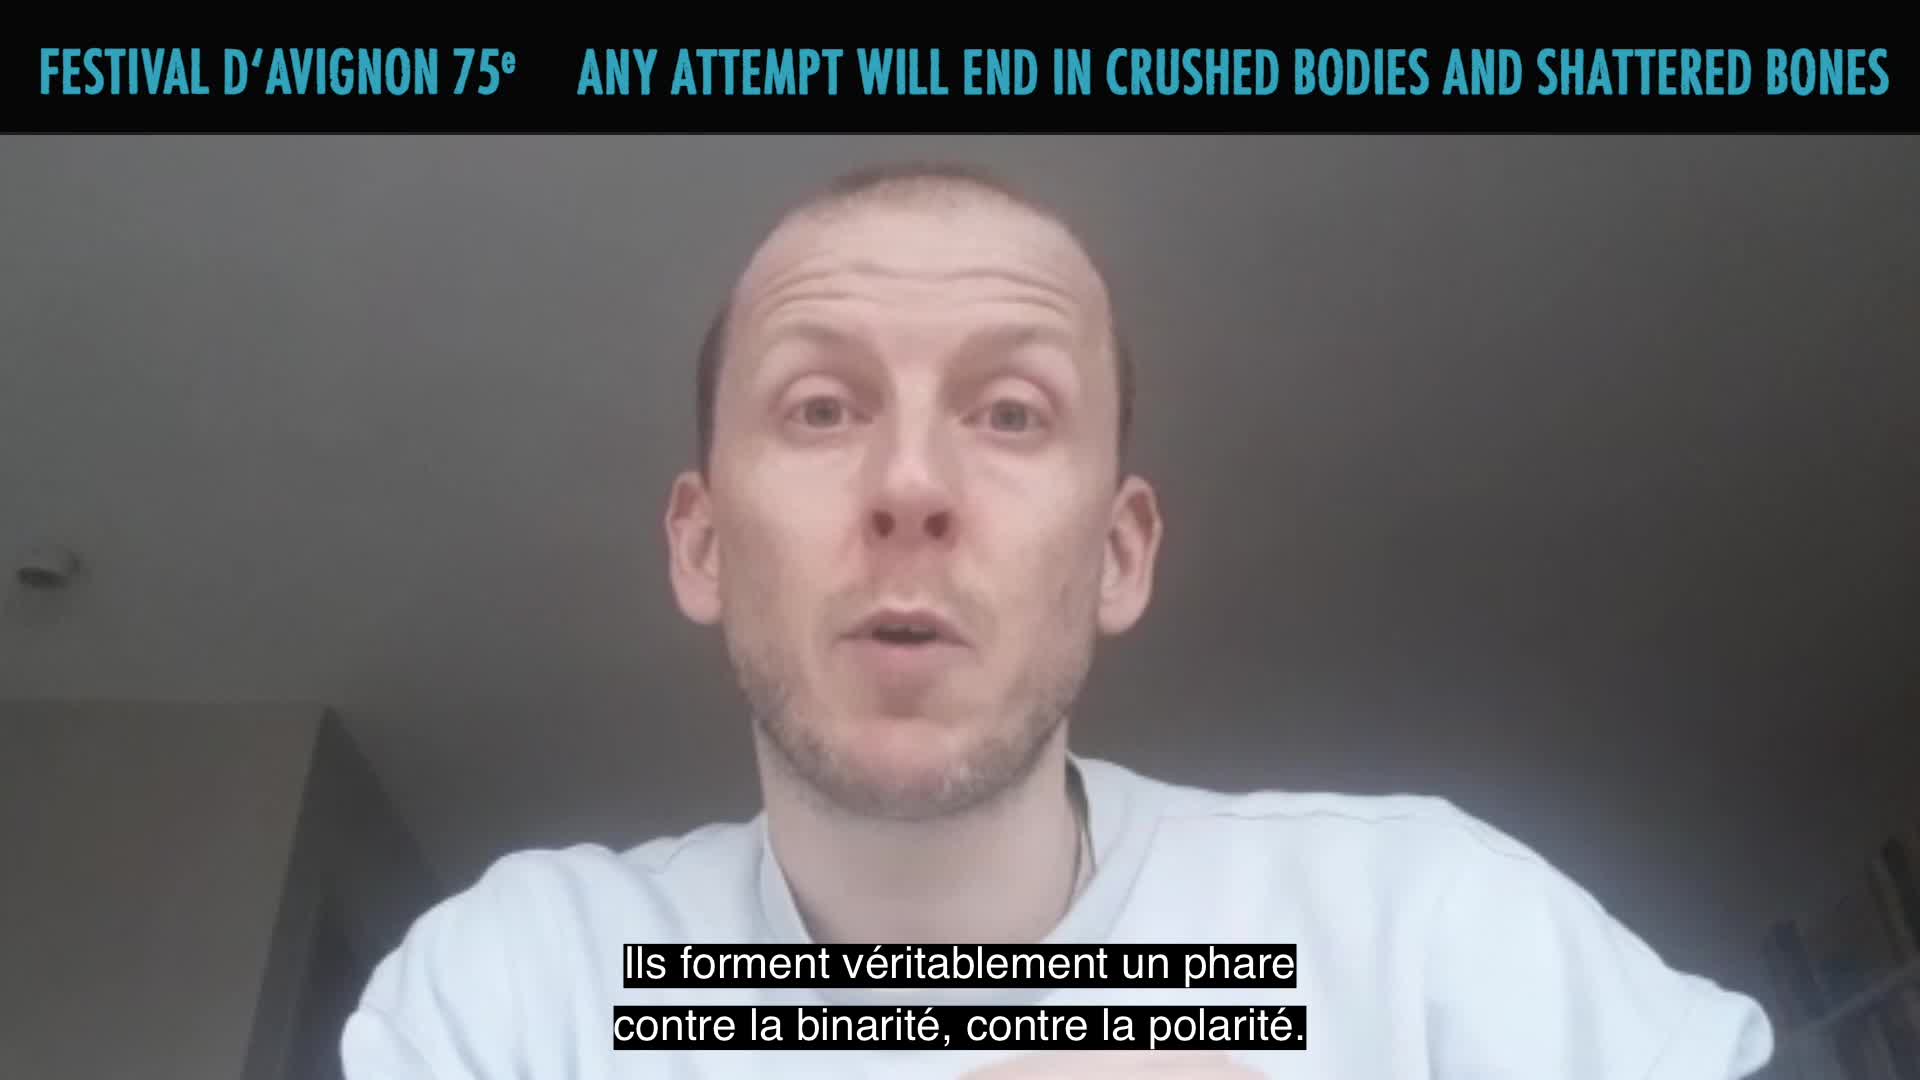 Vidéo Jan Martens présente "Any attempt will end in crushed bodies and shattered bones"